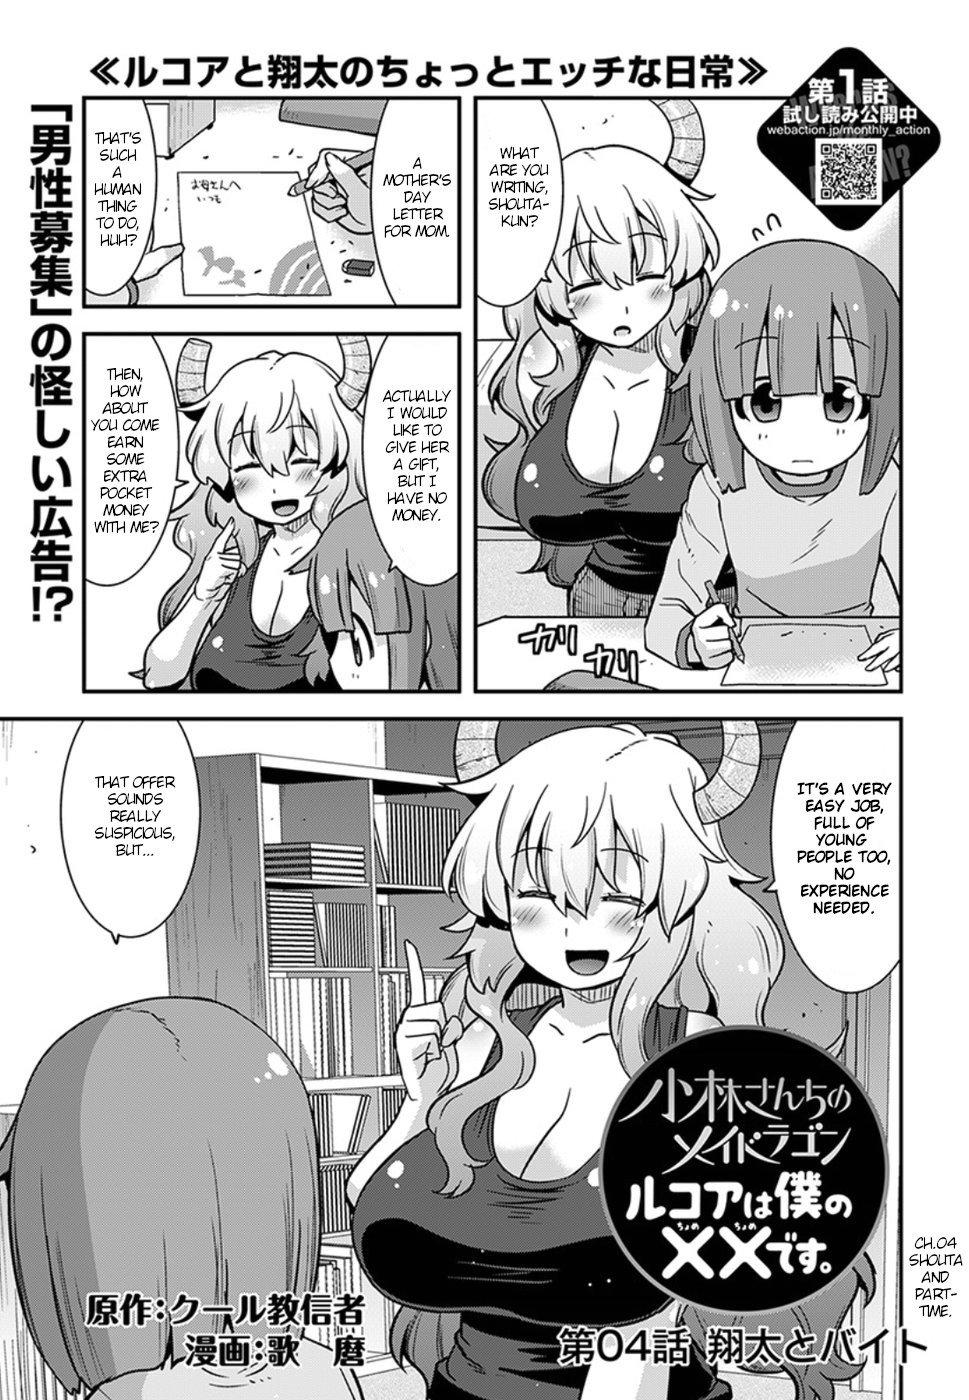 Miss Kobayashi's Dragon Maid: Lucoa is my xx Ch. 4 Shouta and part time